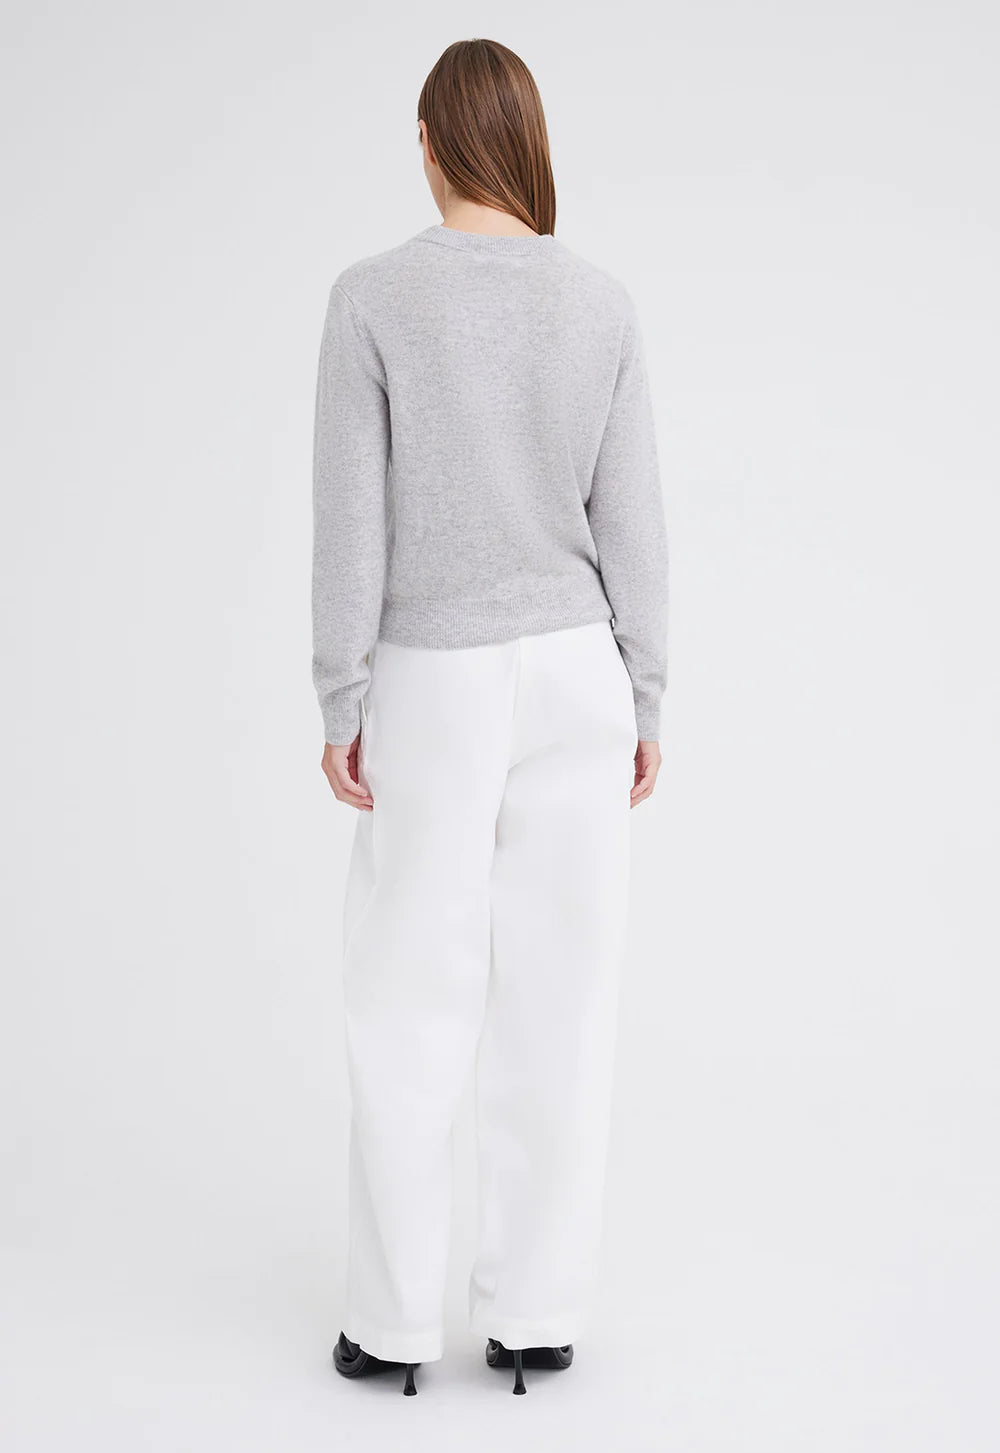 Jac + Jack Peter Cashmere Sweater - Pale Grey Marle